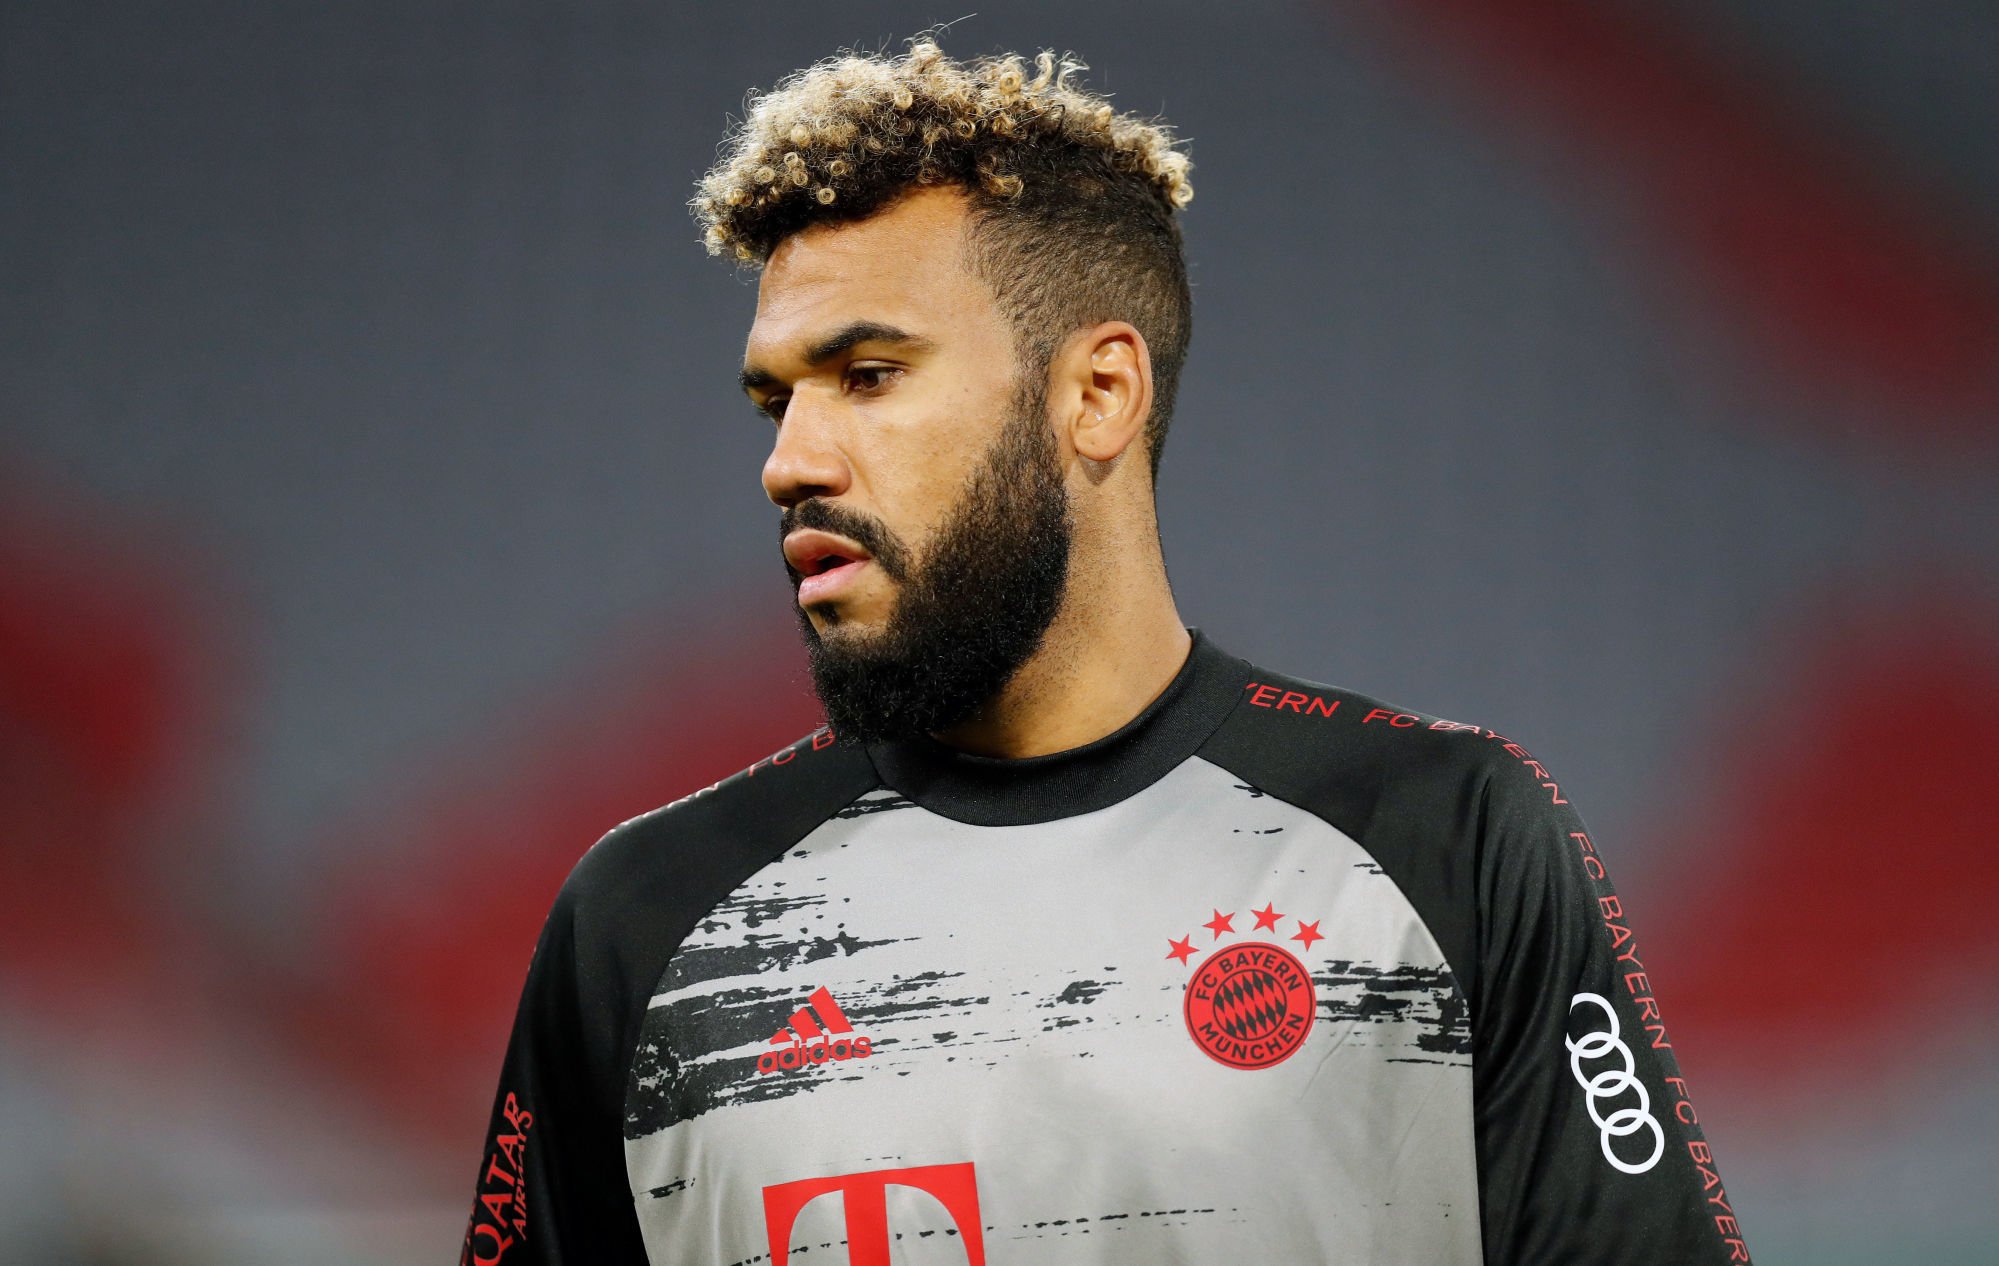 Eric Maxim Choupo-Moting
Photo by Icon Sport